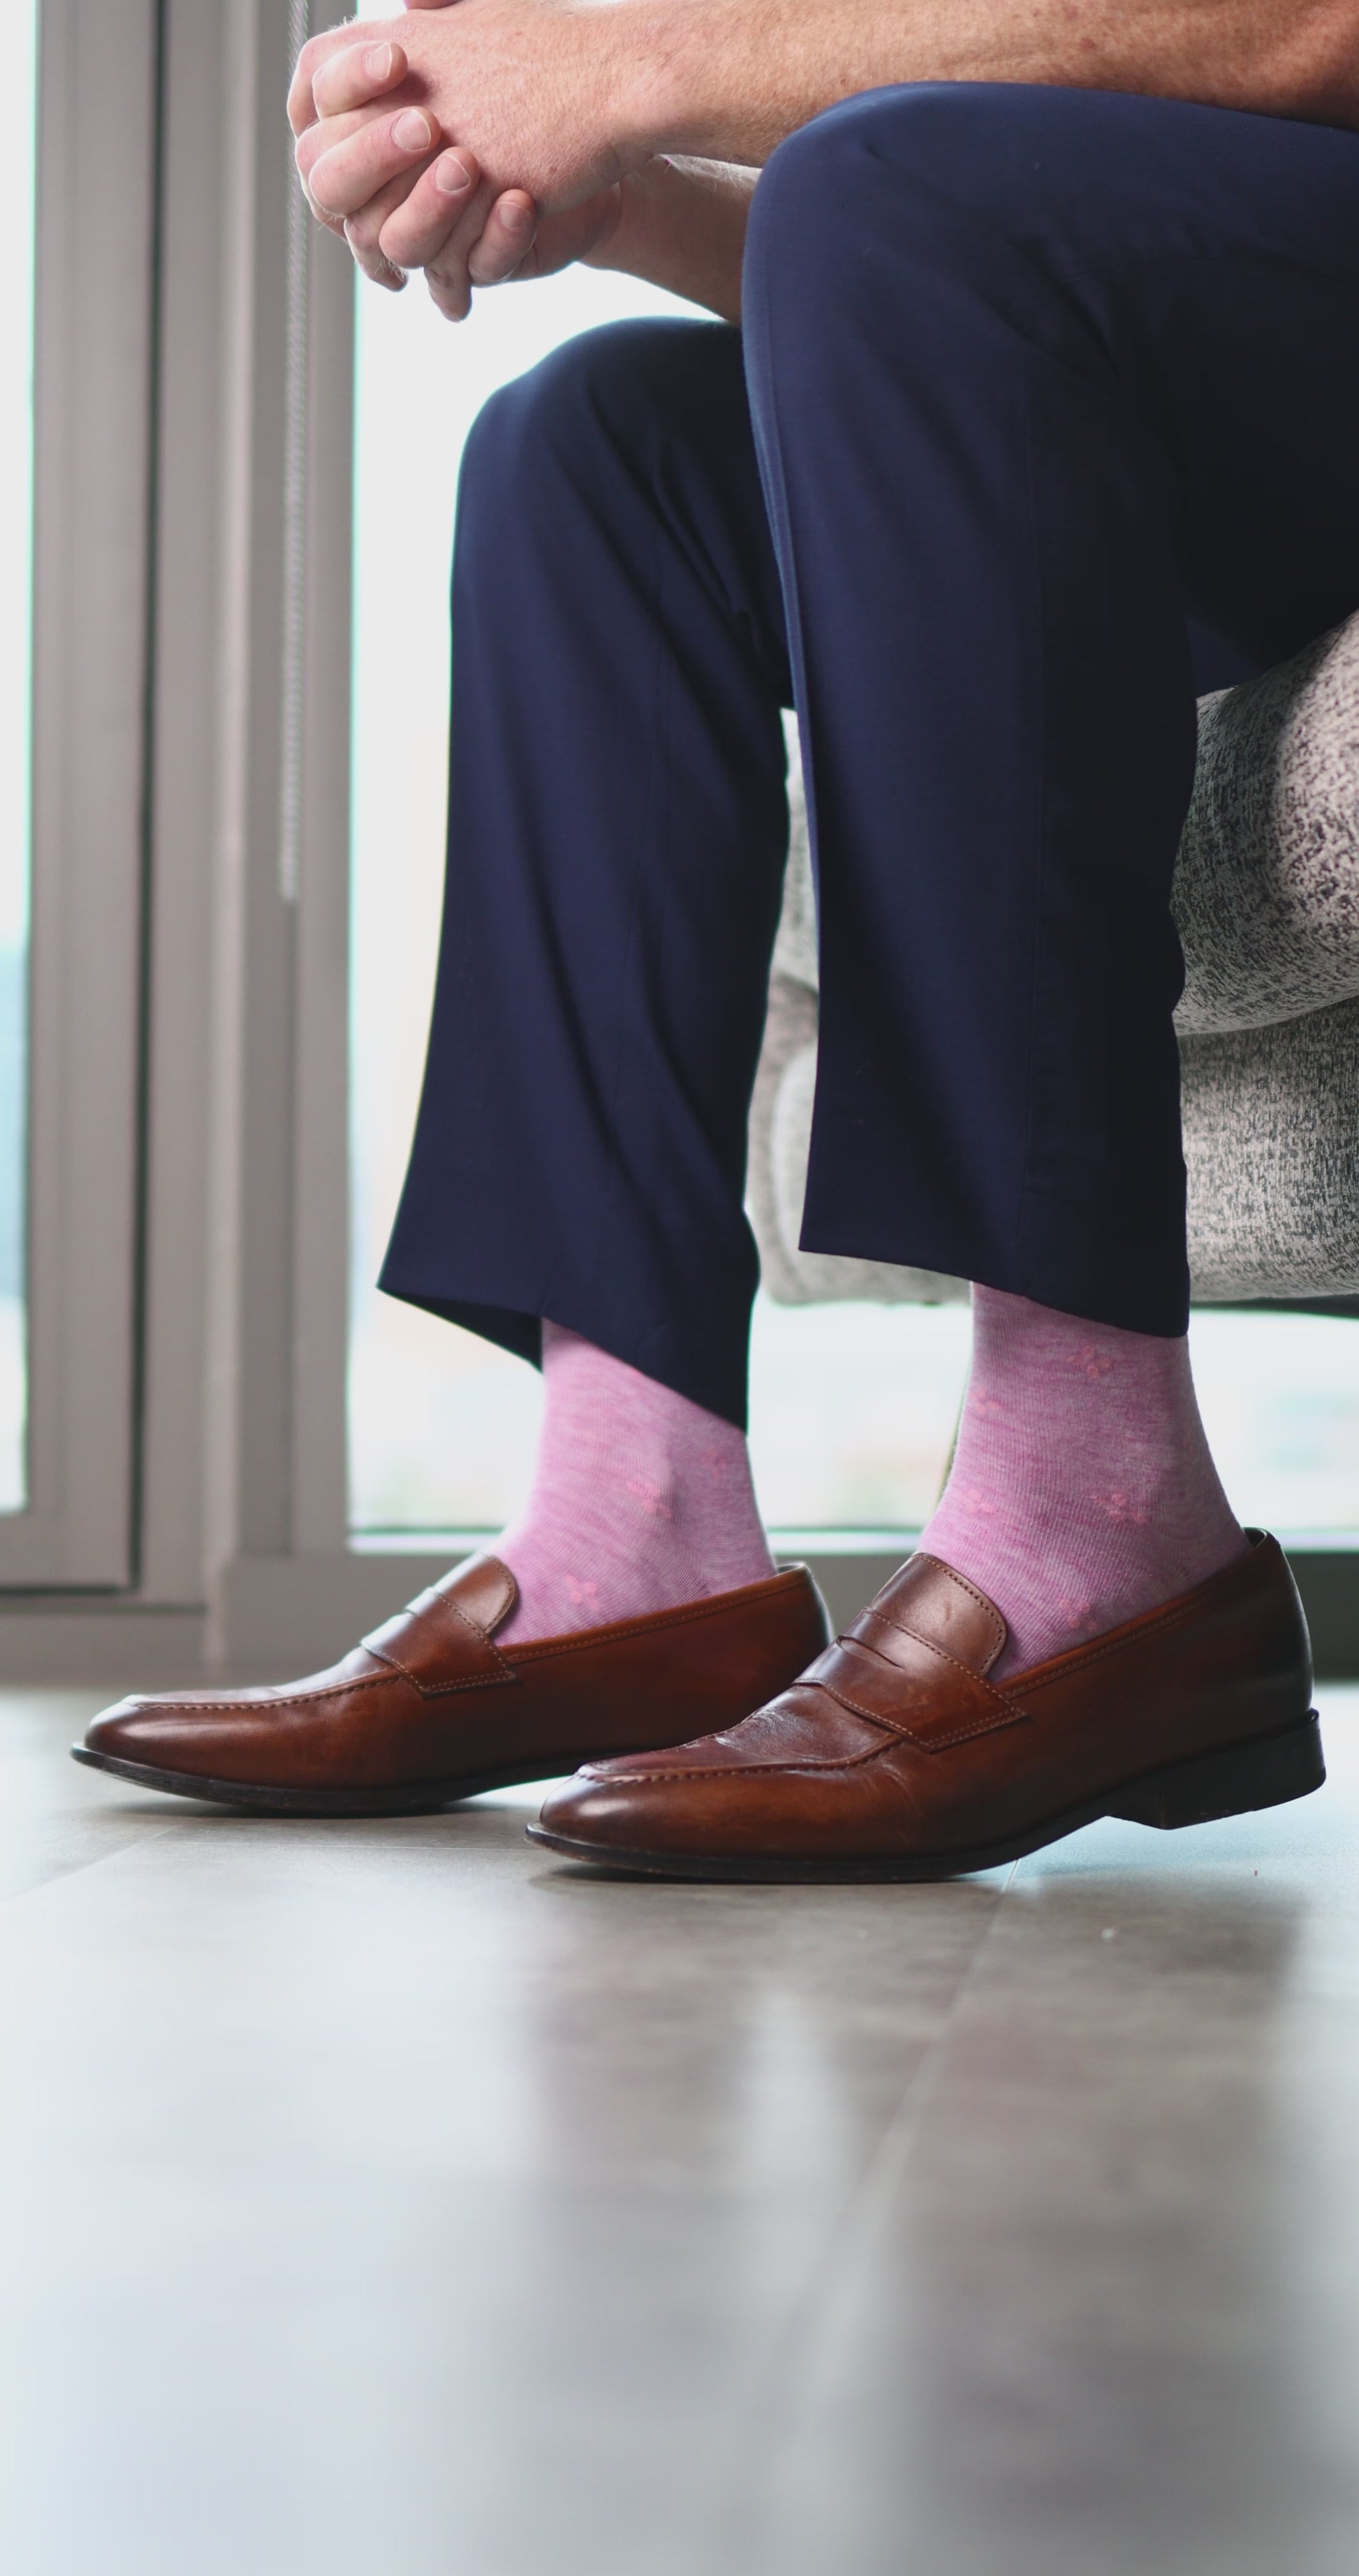 Heathered pink men's dress sock with blush pink flowers